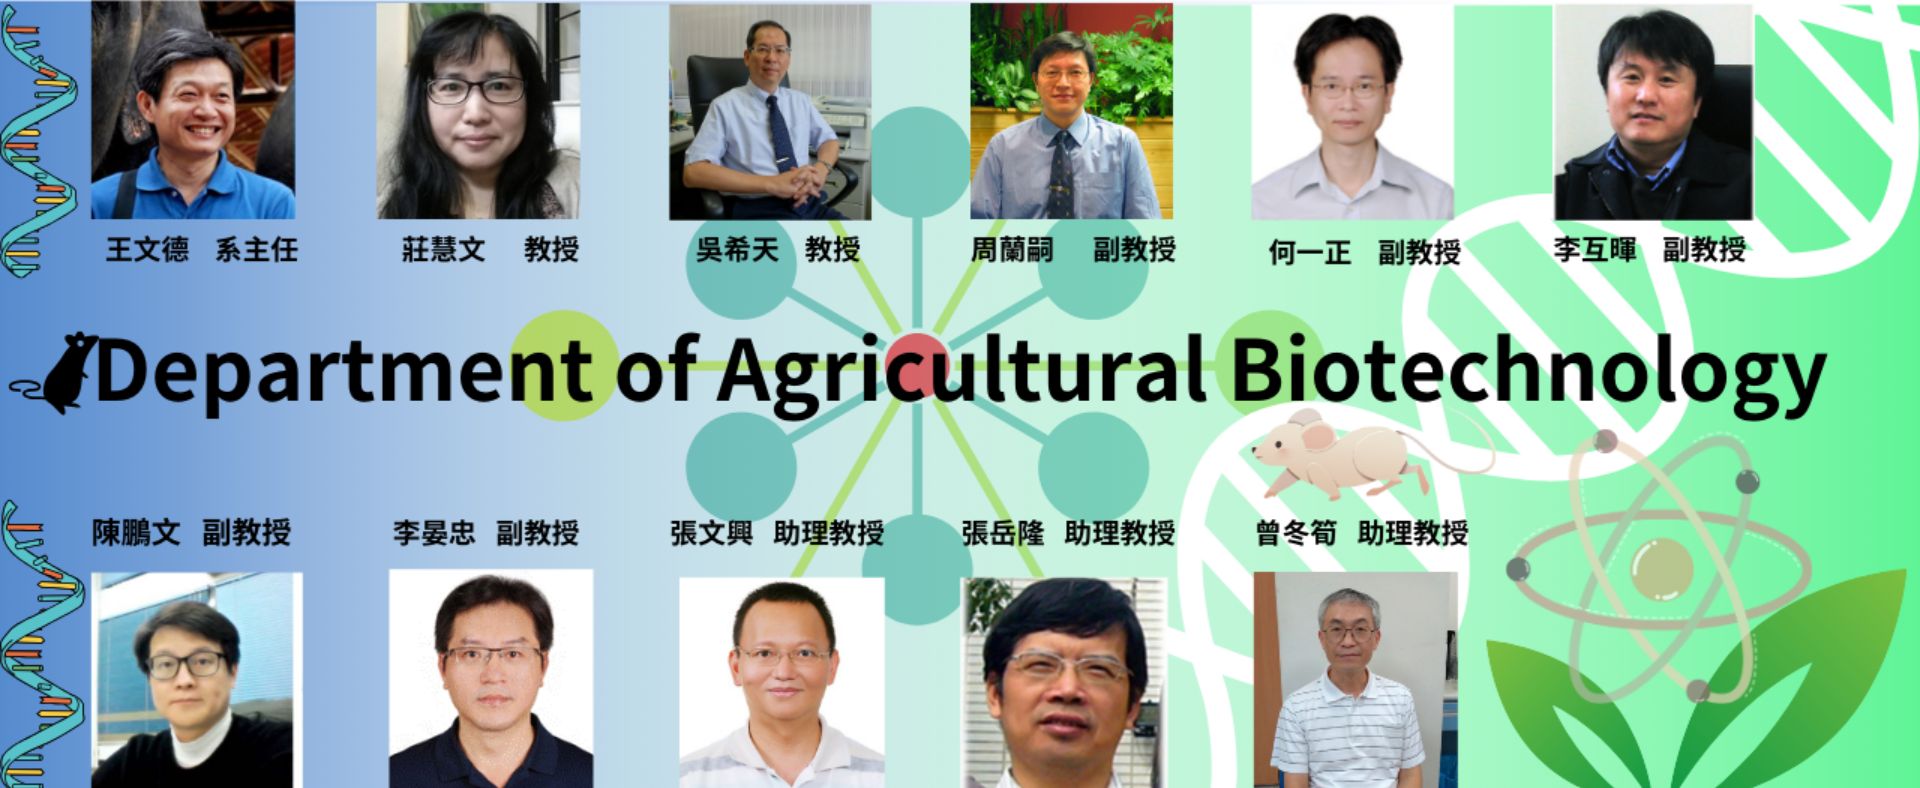 Department of Agricultural Biotechnology